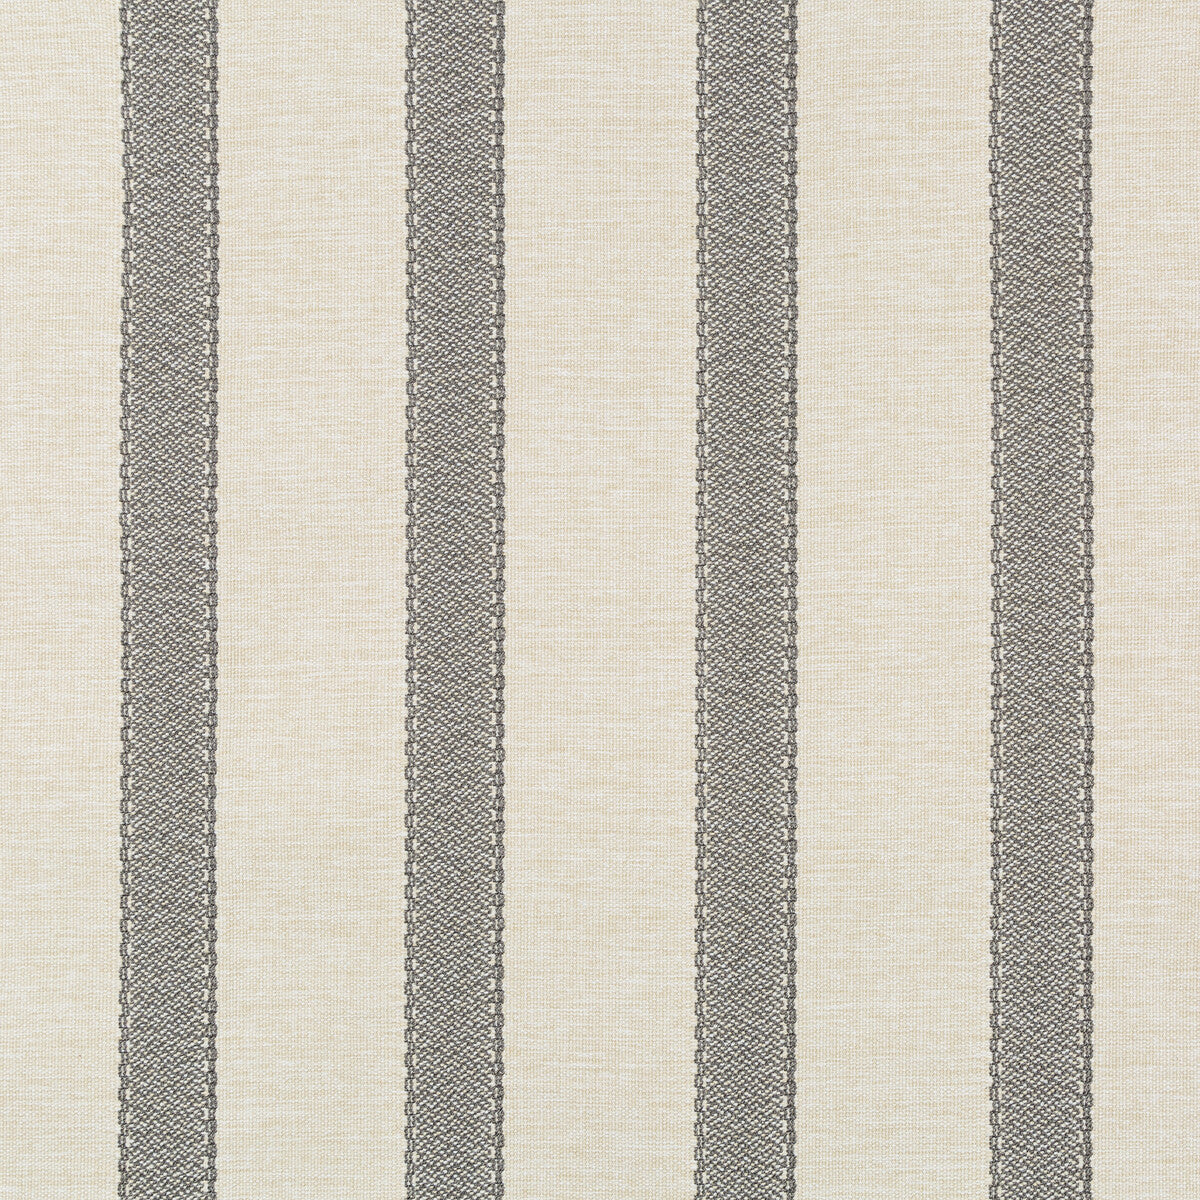 Skysail fabric in graphite color - pattern 35535.1611.0 - by Kravet Couture in the Vista collection